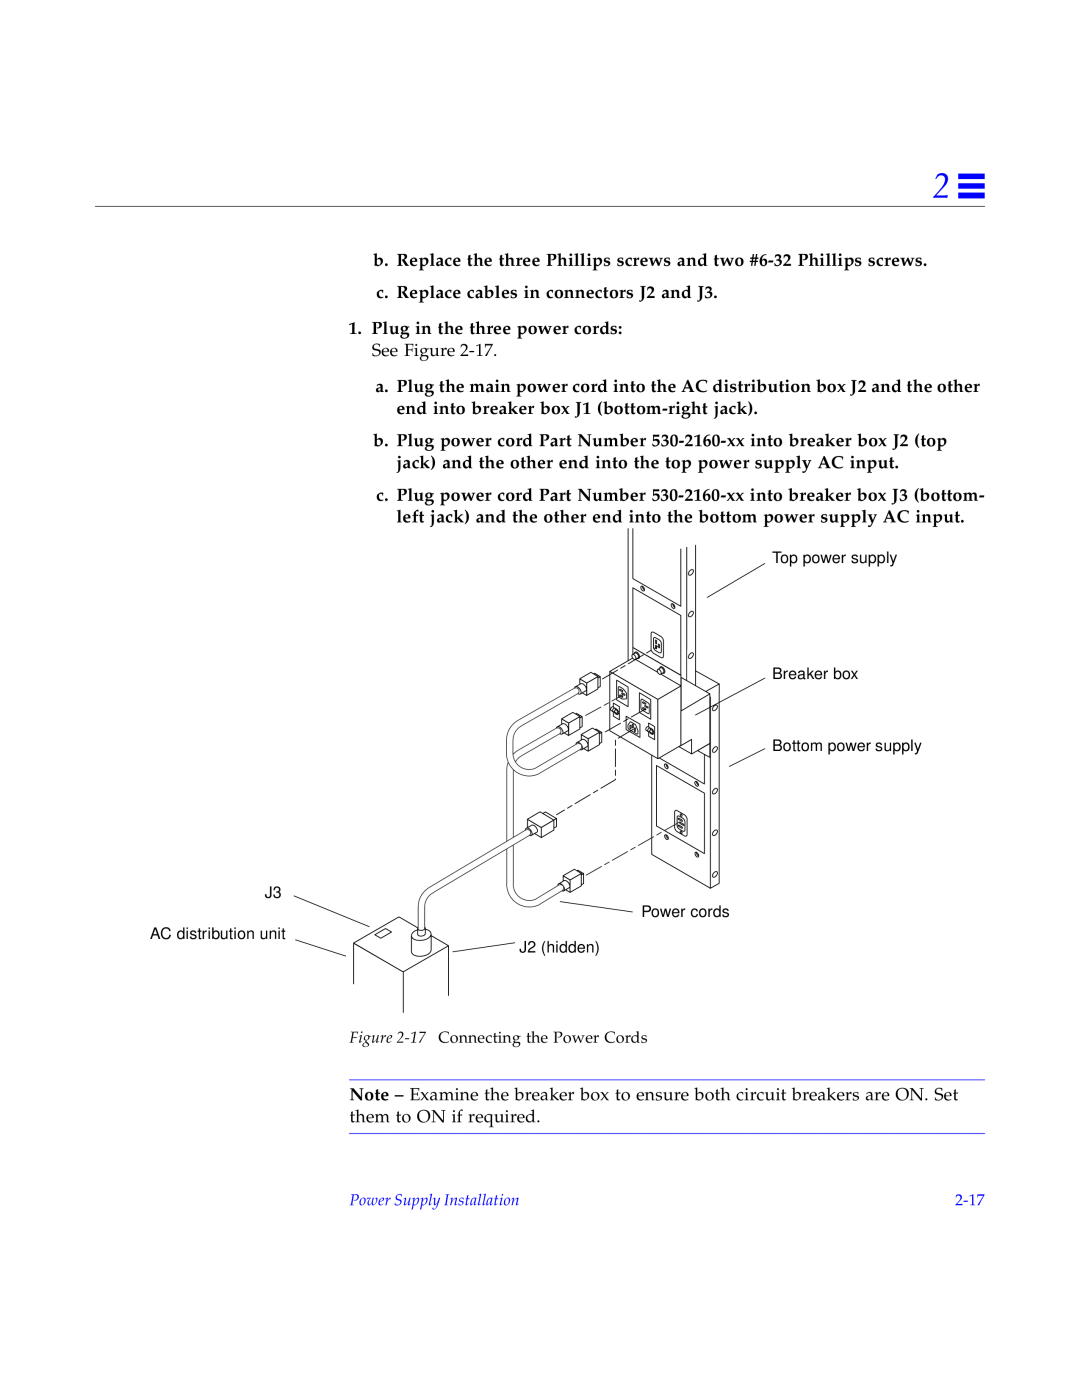 Sun Microsystems 2000E installation manual b. Replace the three Phillips screws and two #6-32 Phillips screws 